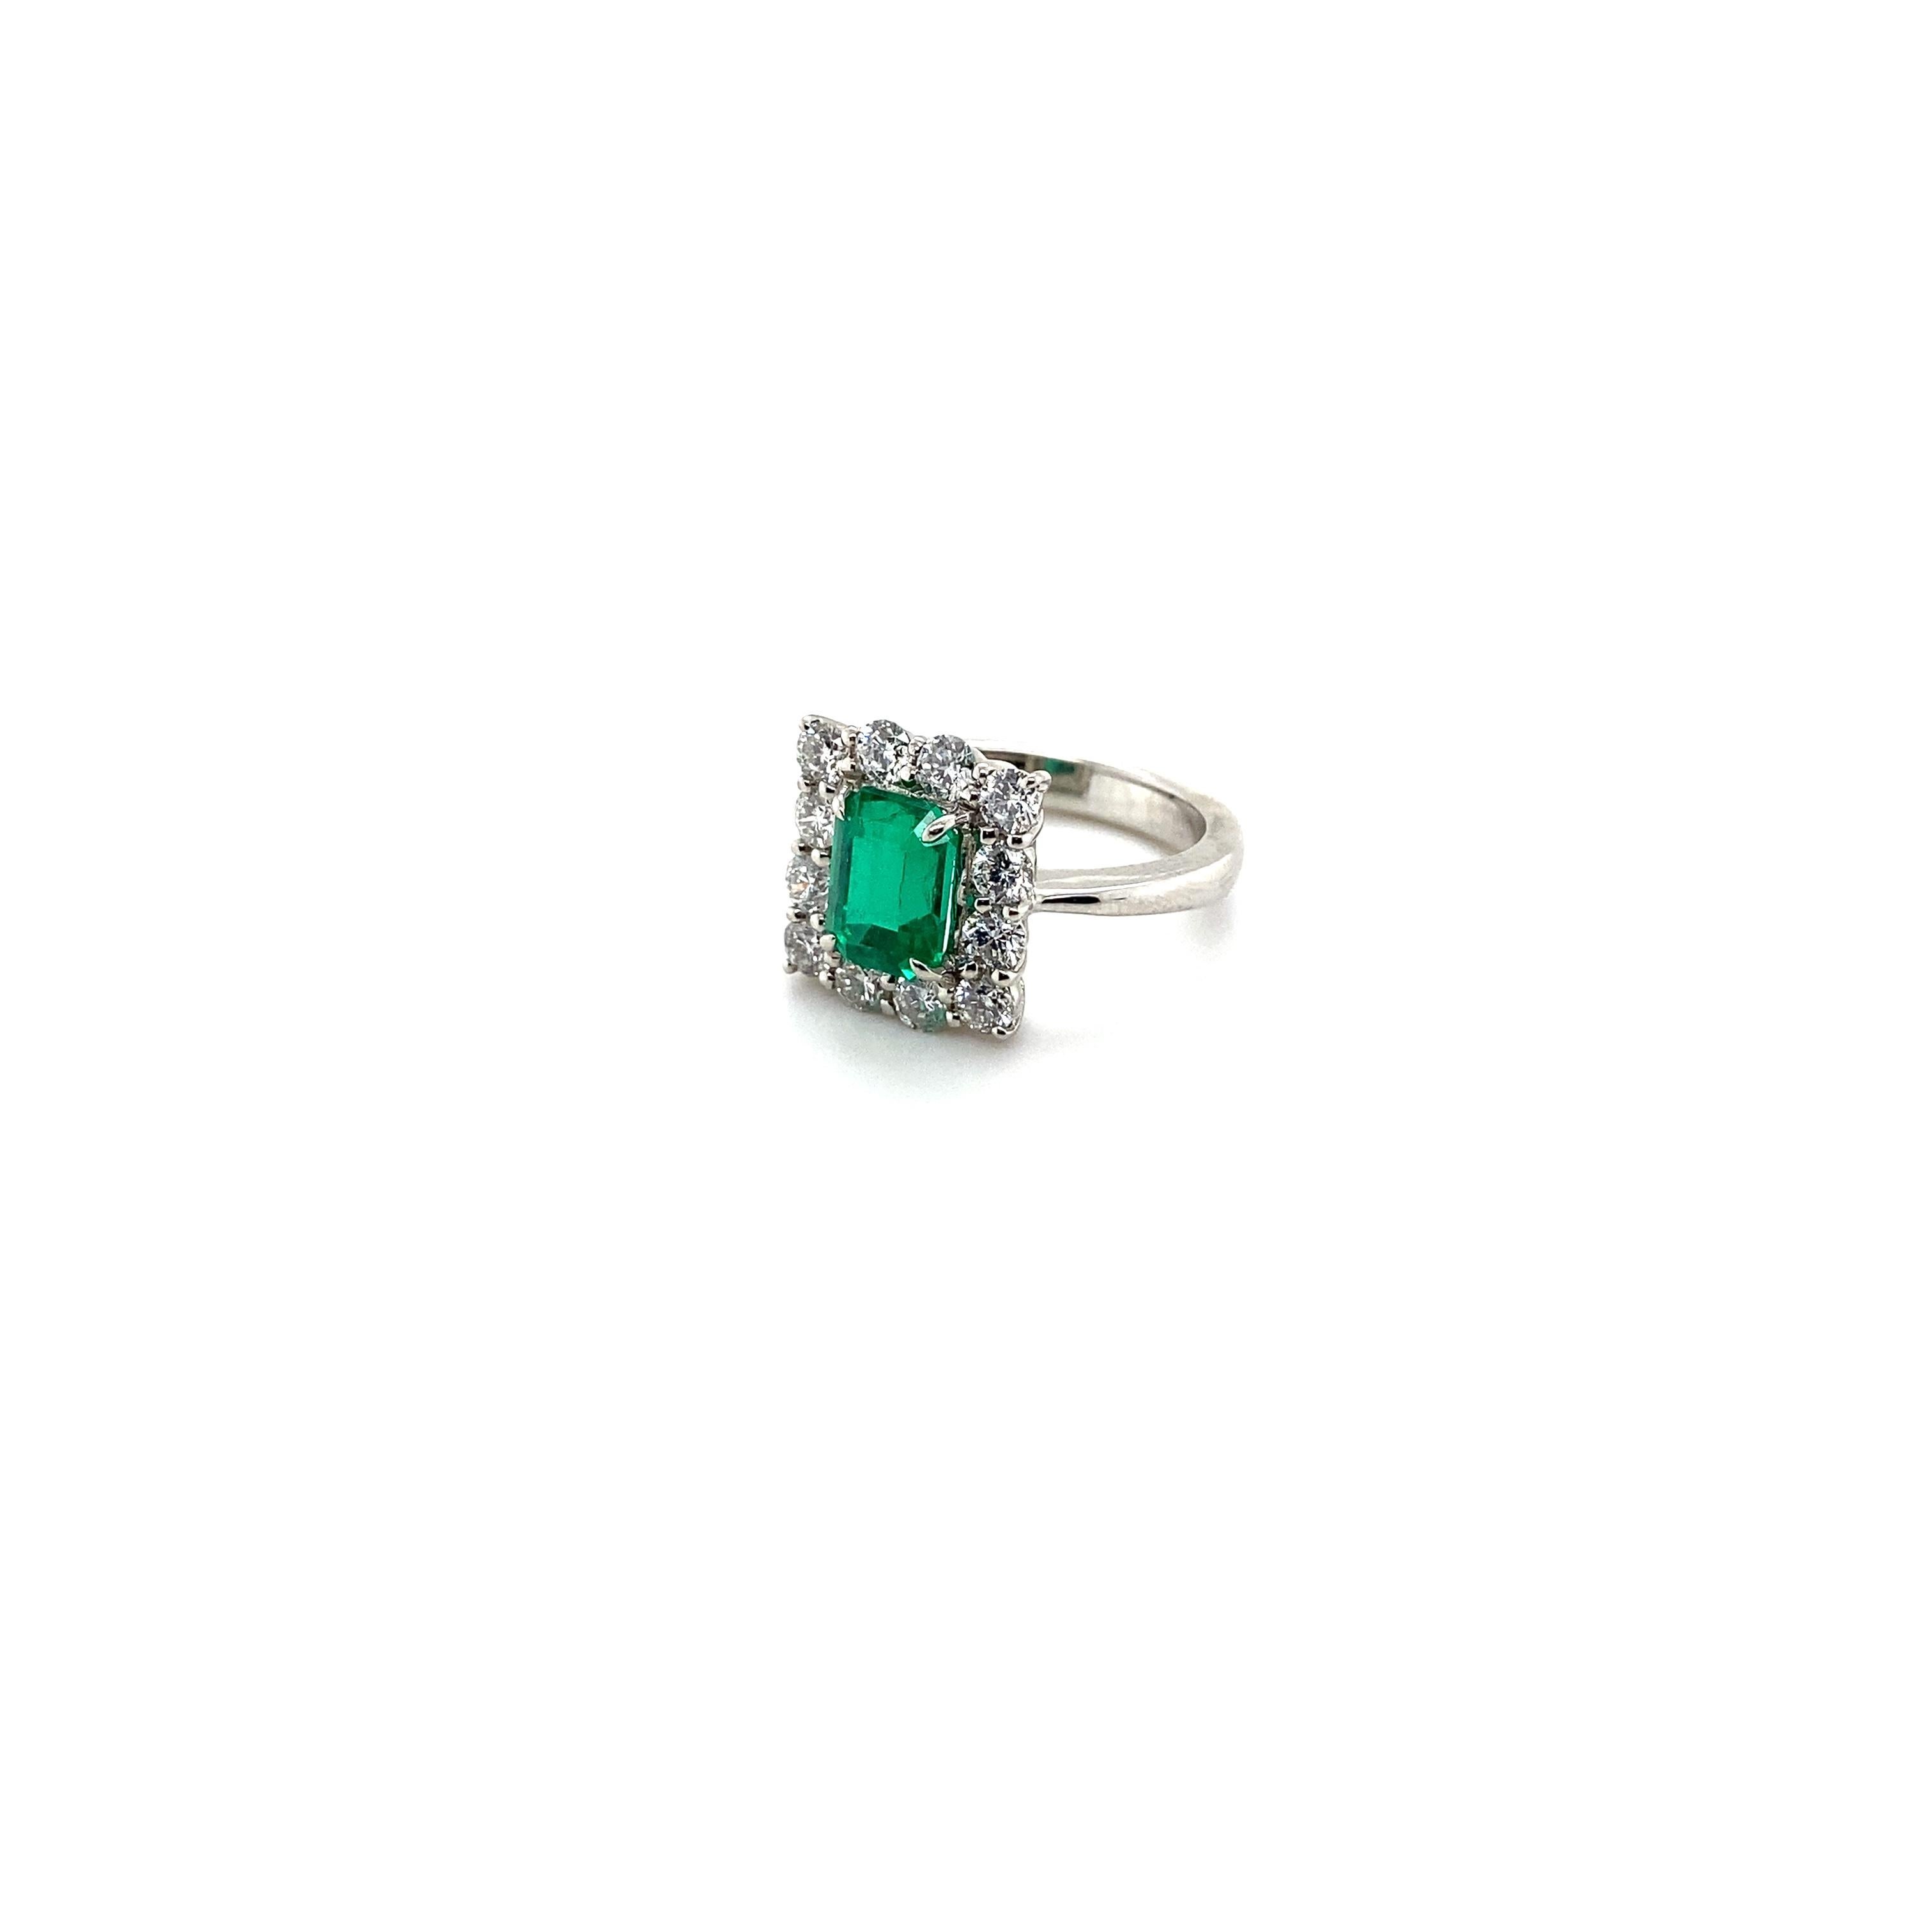 Crafted in Platinum, the center is adorned by a GRS Certified vivid green color-saturated, legendary color variety, Muzo Colombian emerald. Colombian specifically from the Muzo mines is the finest color and high luster.
A rarity of nature, weighing